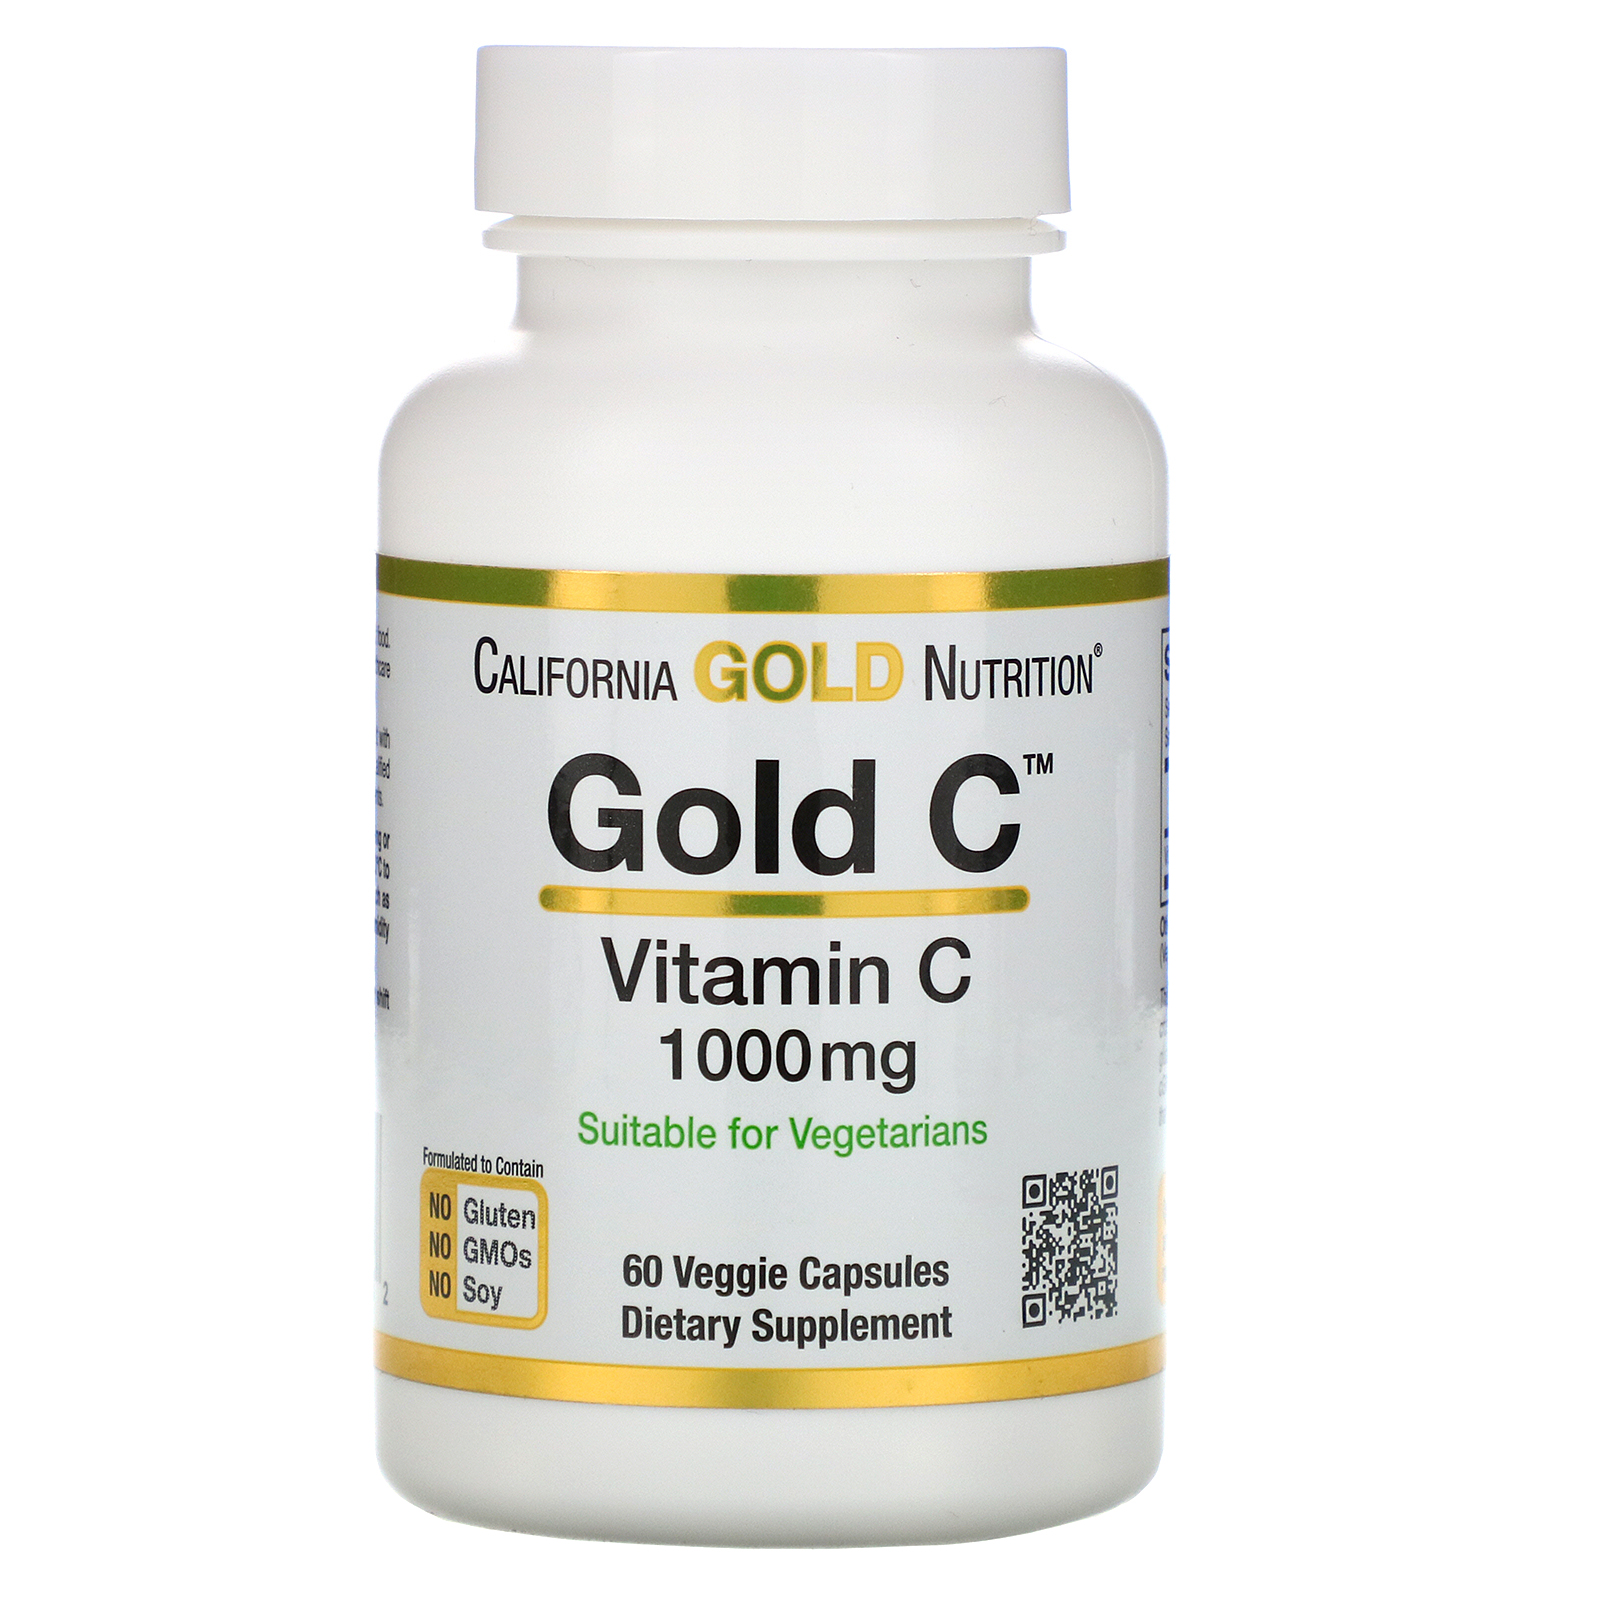 California Gold Nutrition, Gold C, Vitamin C, 1,000 mg, Ultimate Sup